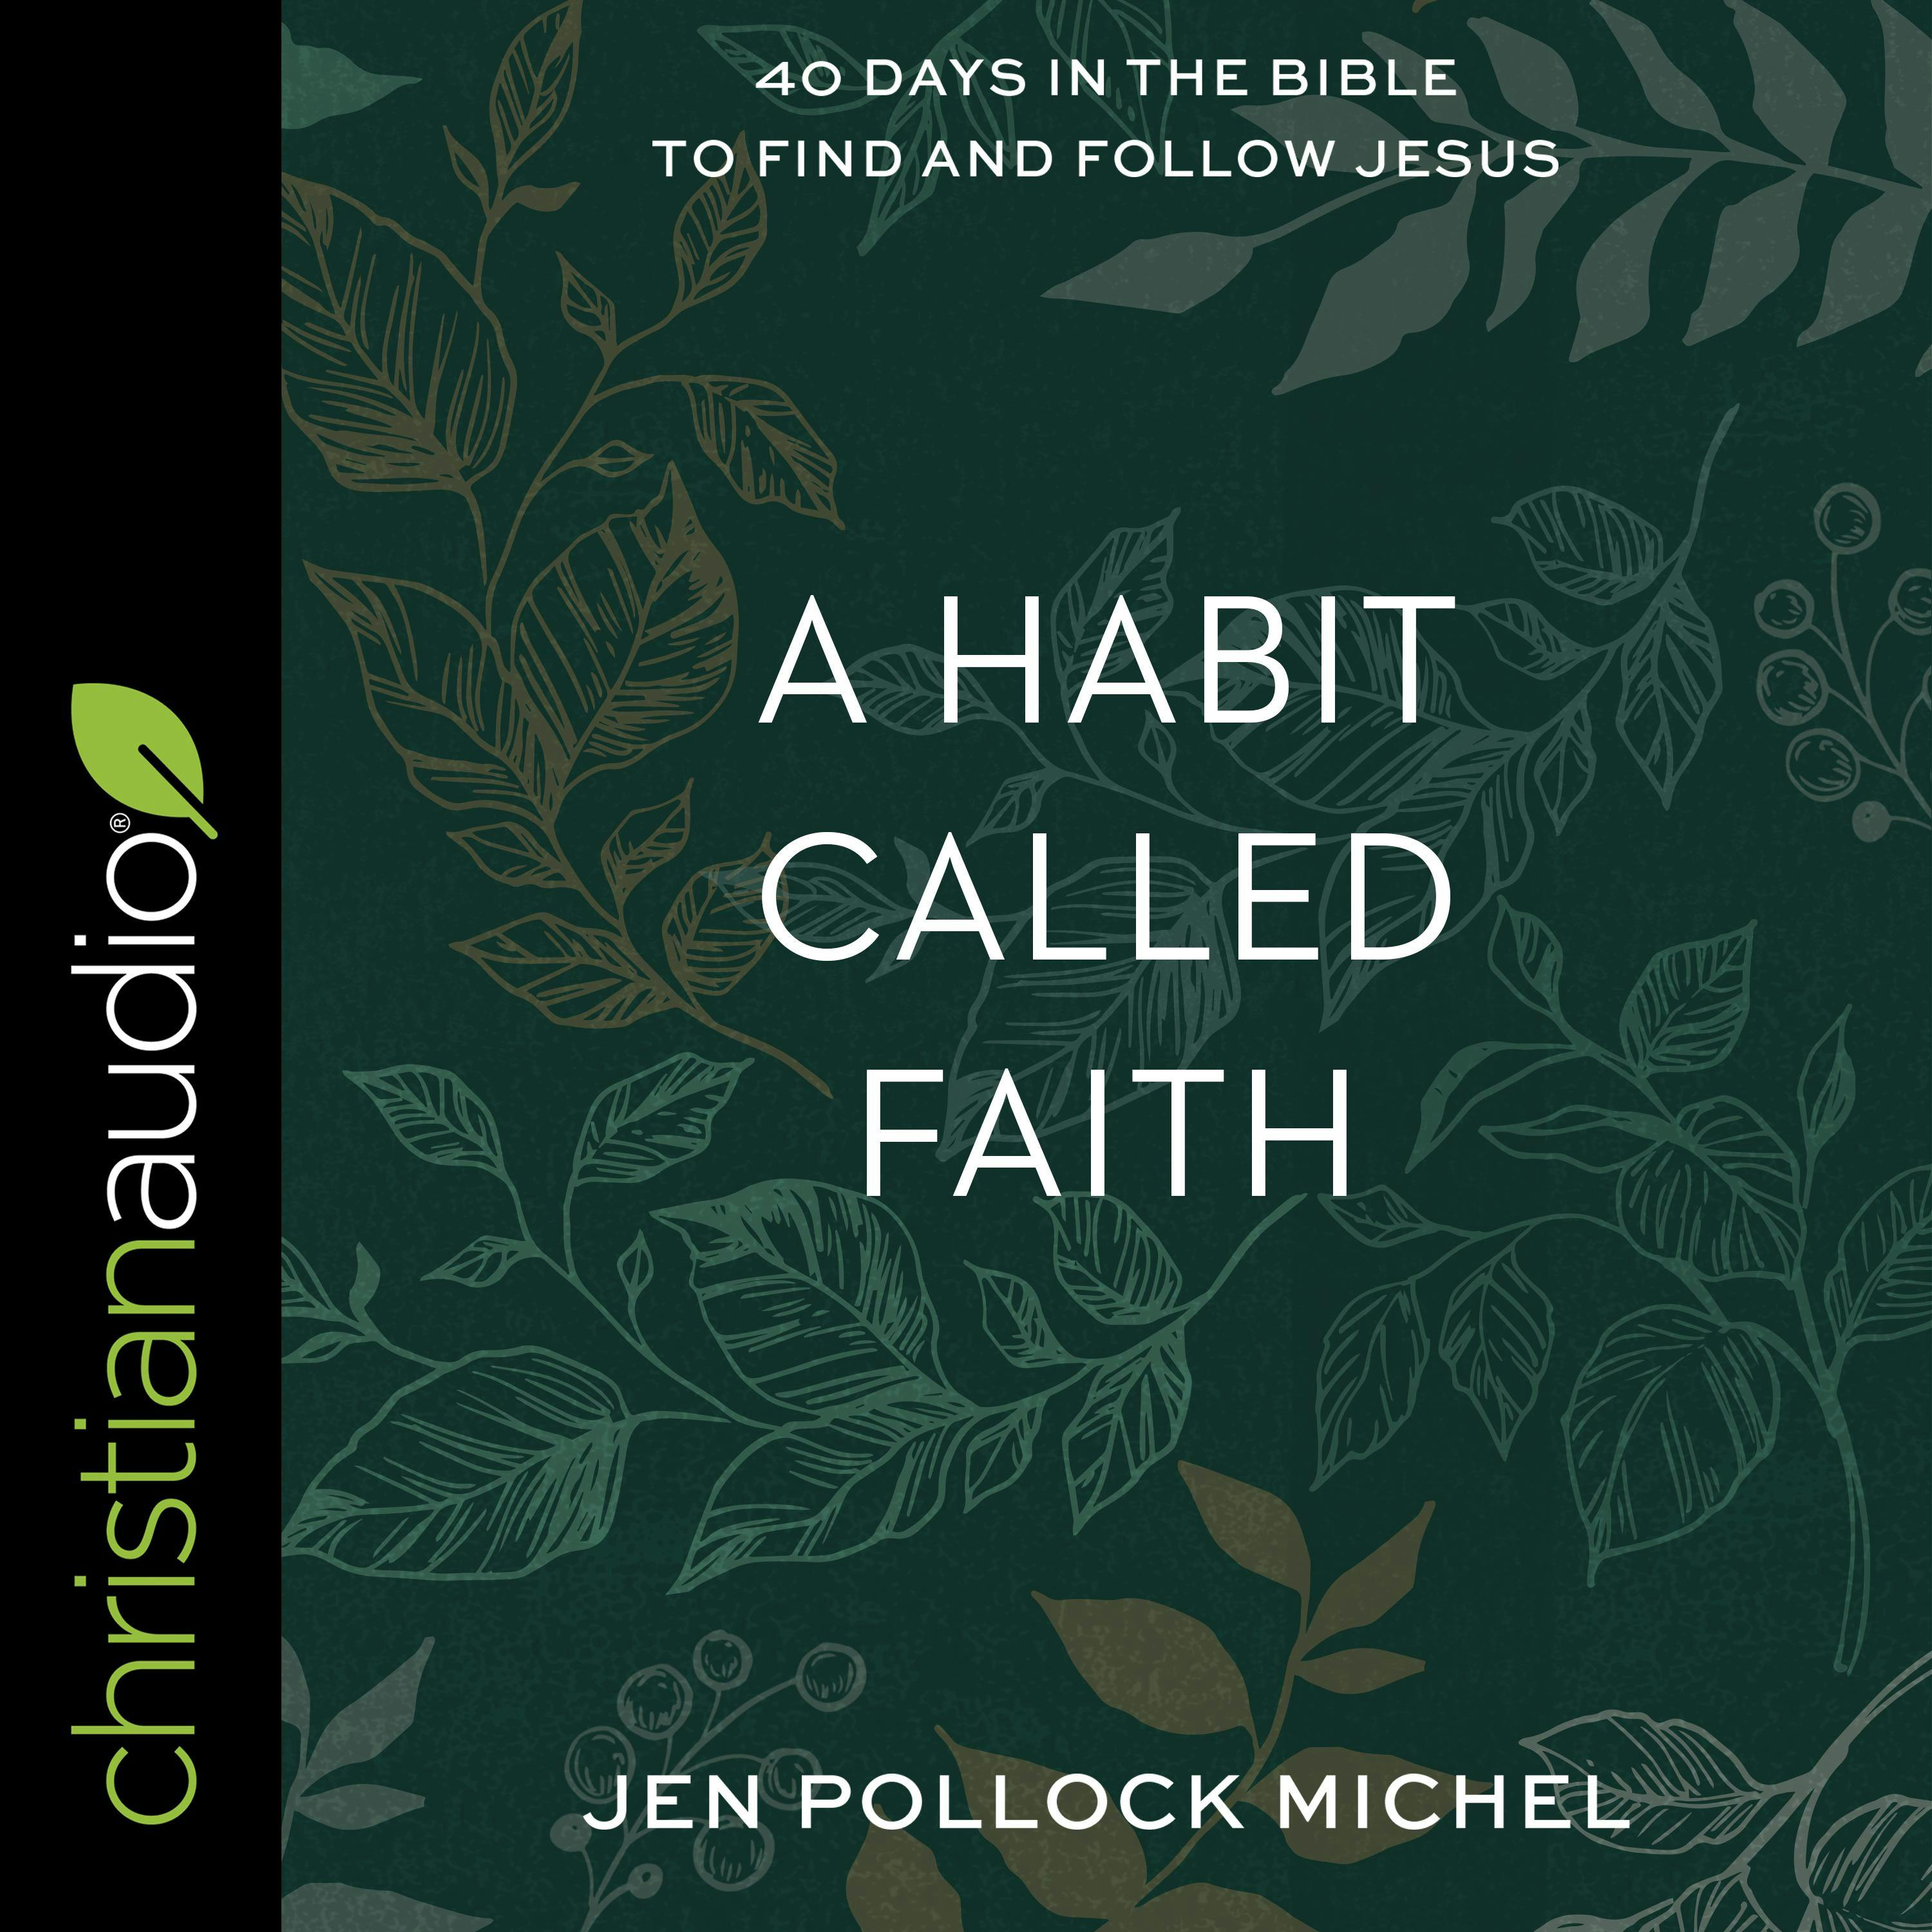 A Habit Called Faith: 40 Days in the Bible to Find and Follow Jesus - Jen Pollock Michel